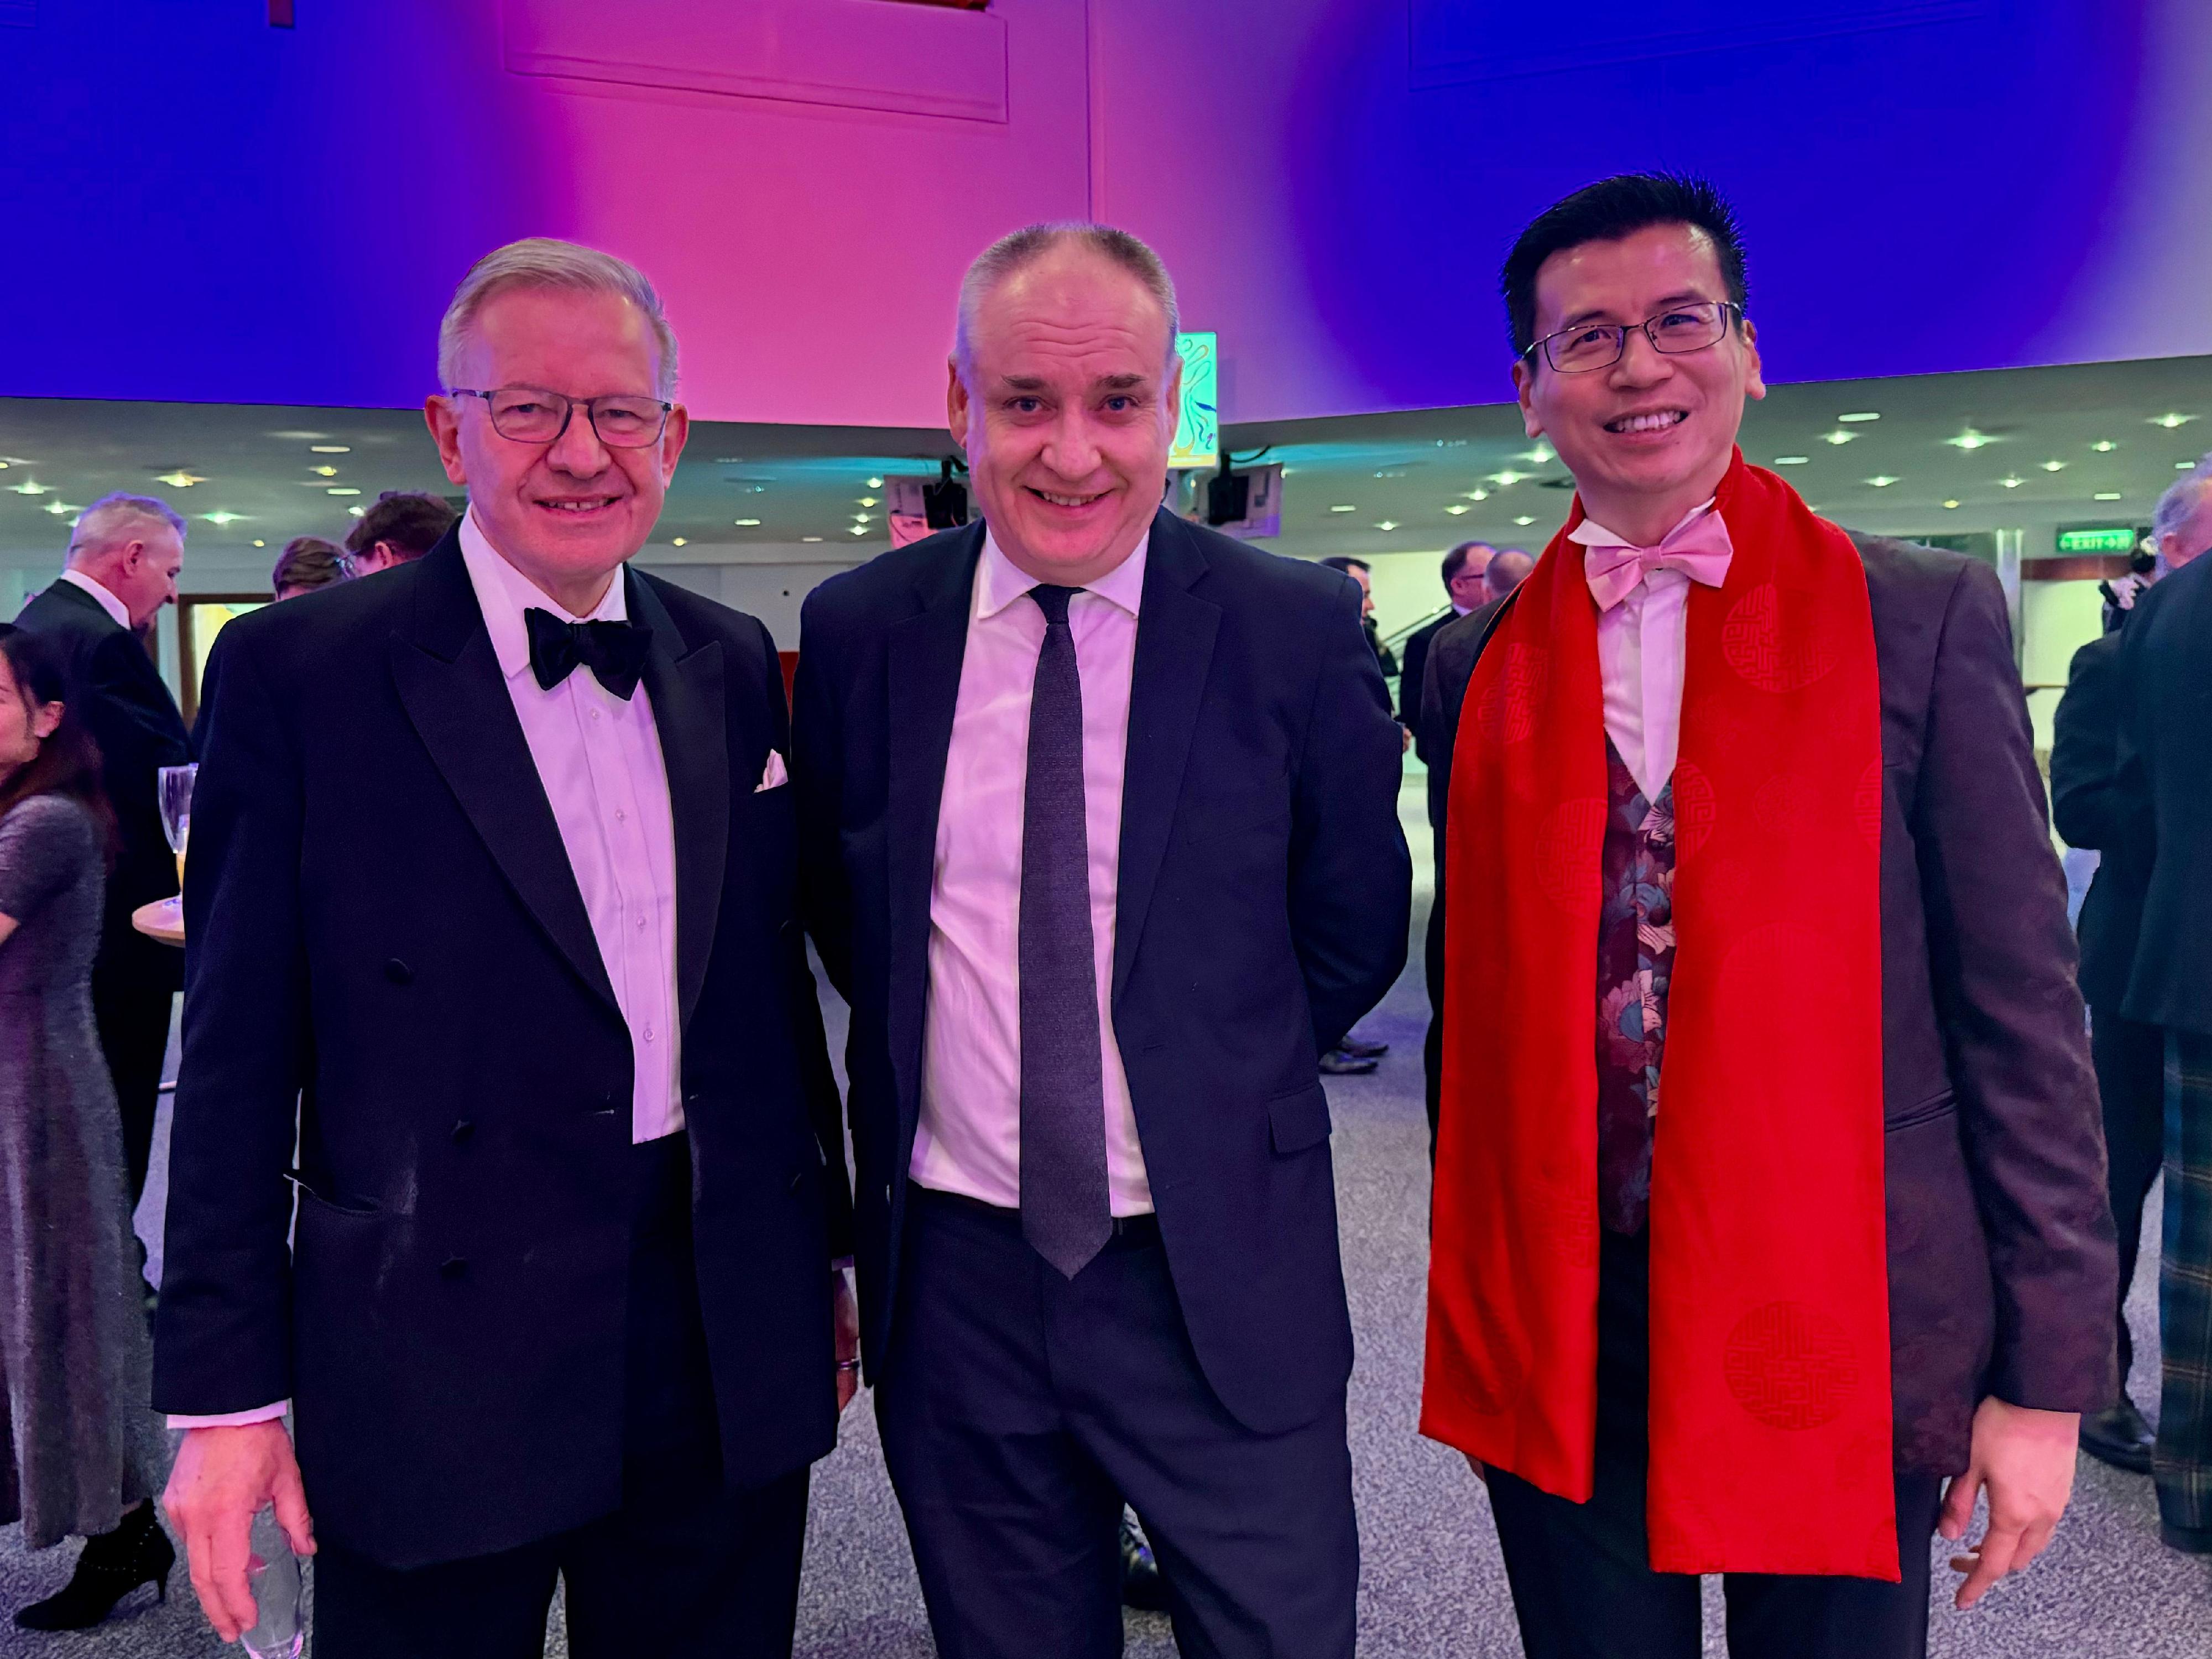 The Hong Kong Economic and Trade Office, London (London ETO) hosted the "Toast to the Dragon" reception in Edinburgh, the United Kingdom, on February 8 (London time). Photo shows (from left) the Chair of the China-Britain Business Council, Sir Sherard Cowper-Coles; the Minister for Small Business, Innovation, Tourism and Trade of the Scottish Government, Mr Richard Lochhead; the Director-General of the London ETO, Mr Gilford Law. 